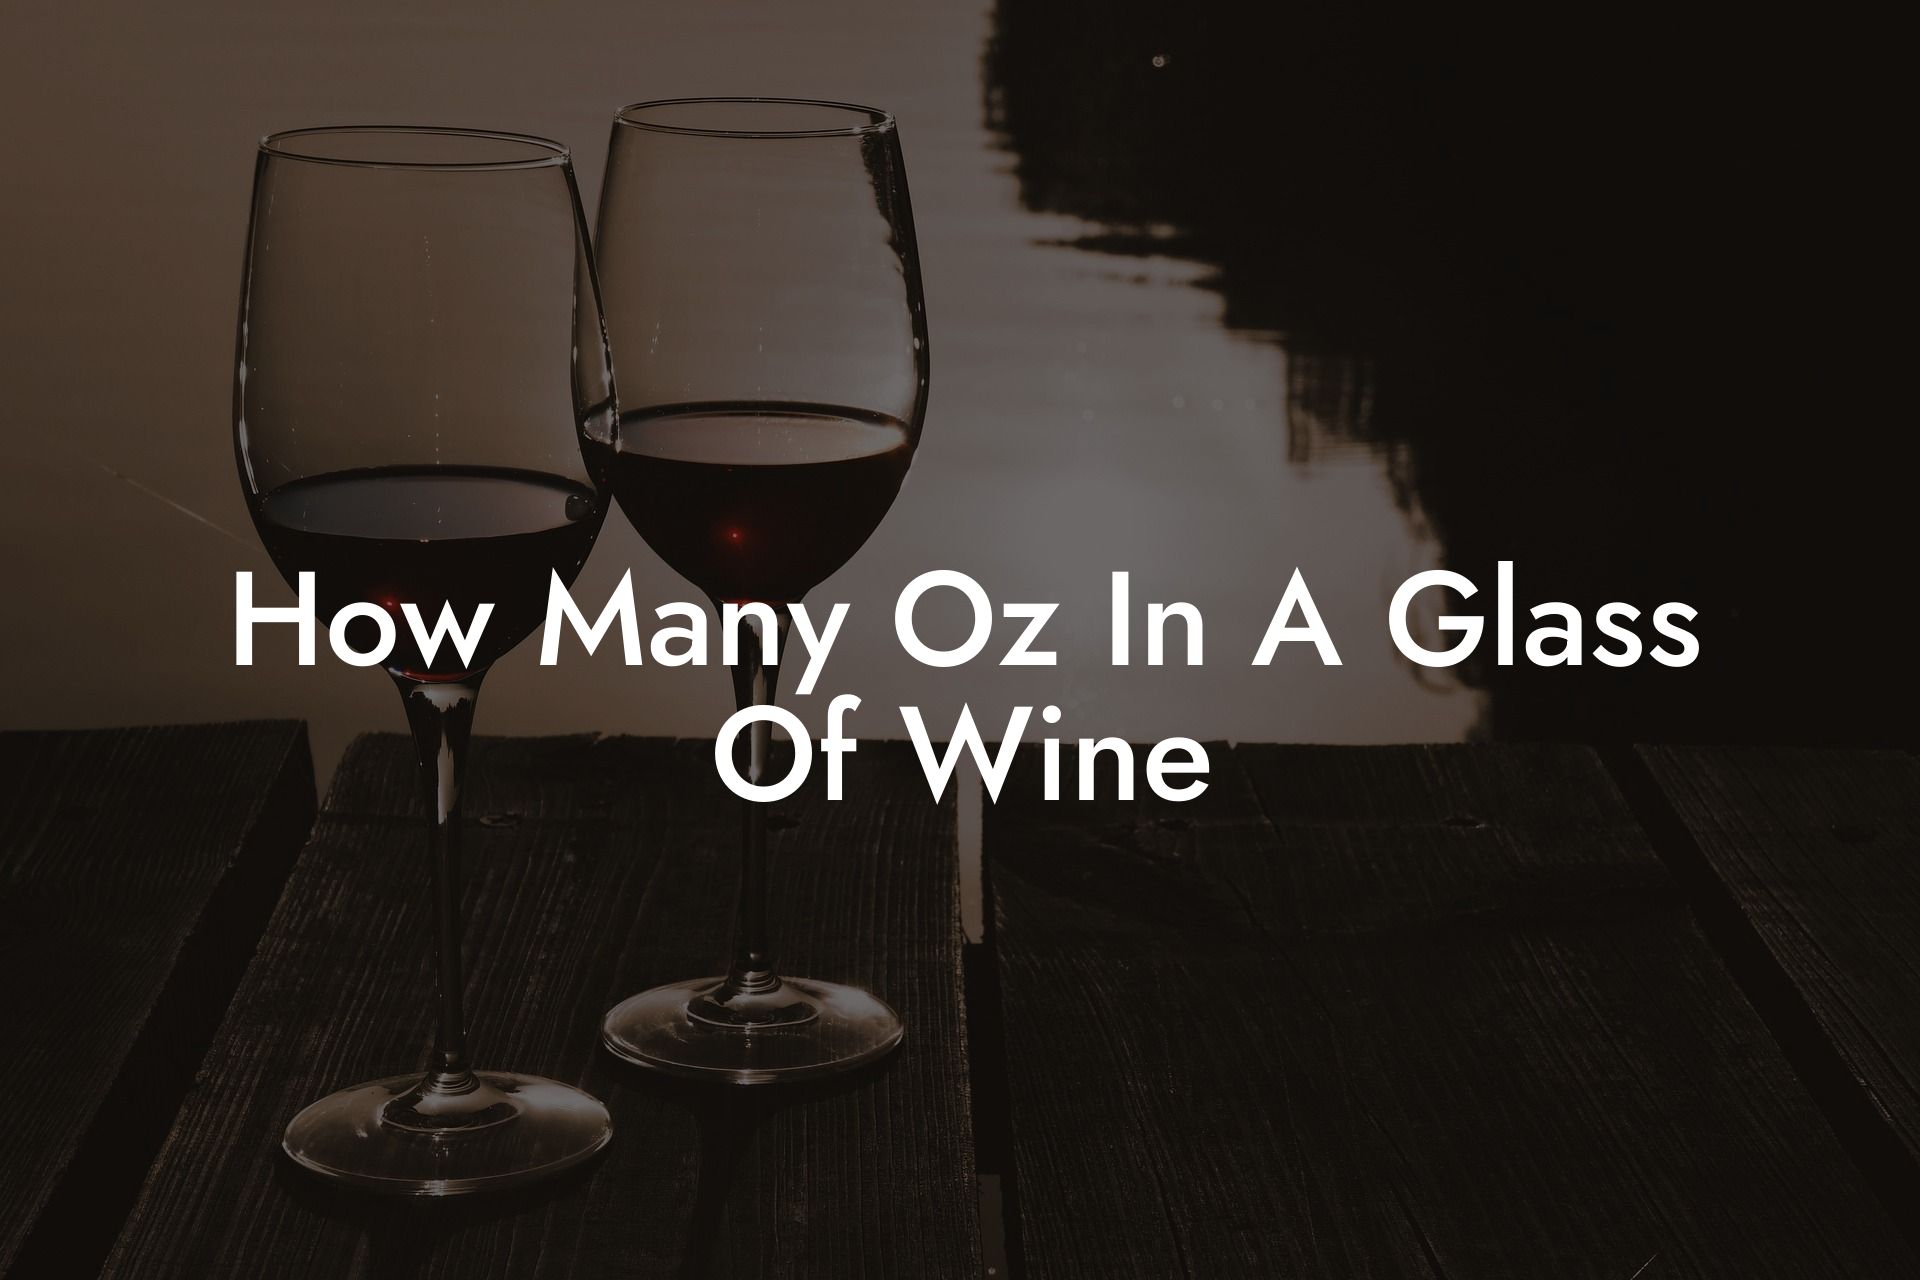 How Many Oz In A Glass Of Wine